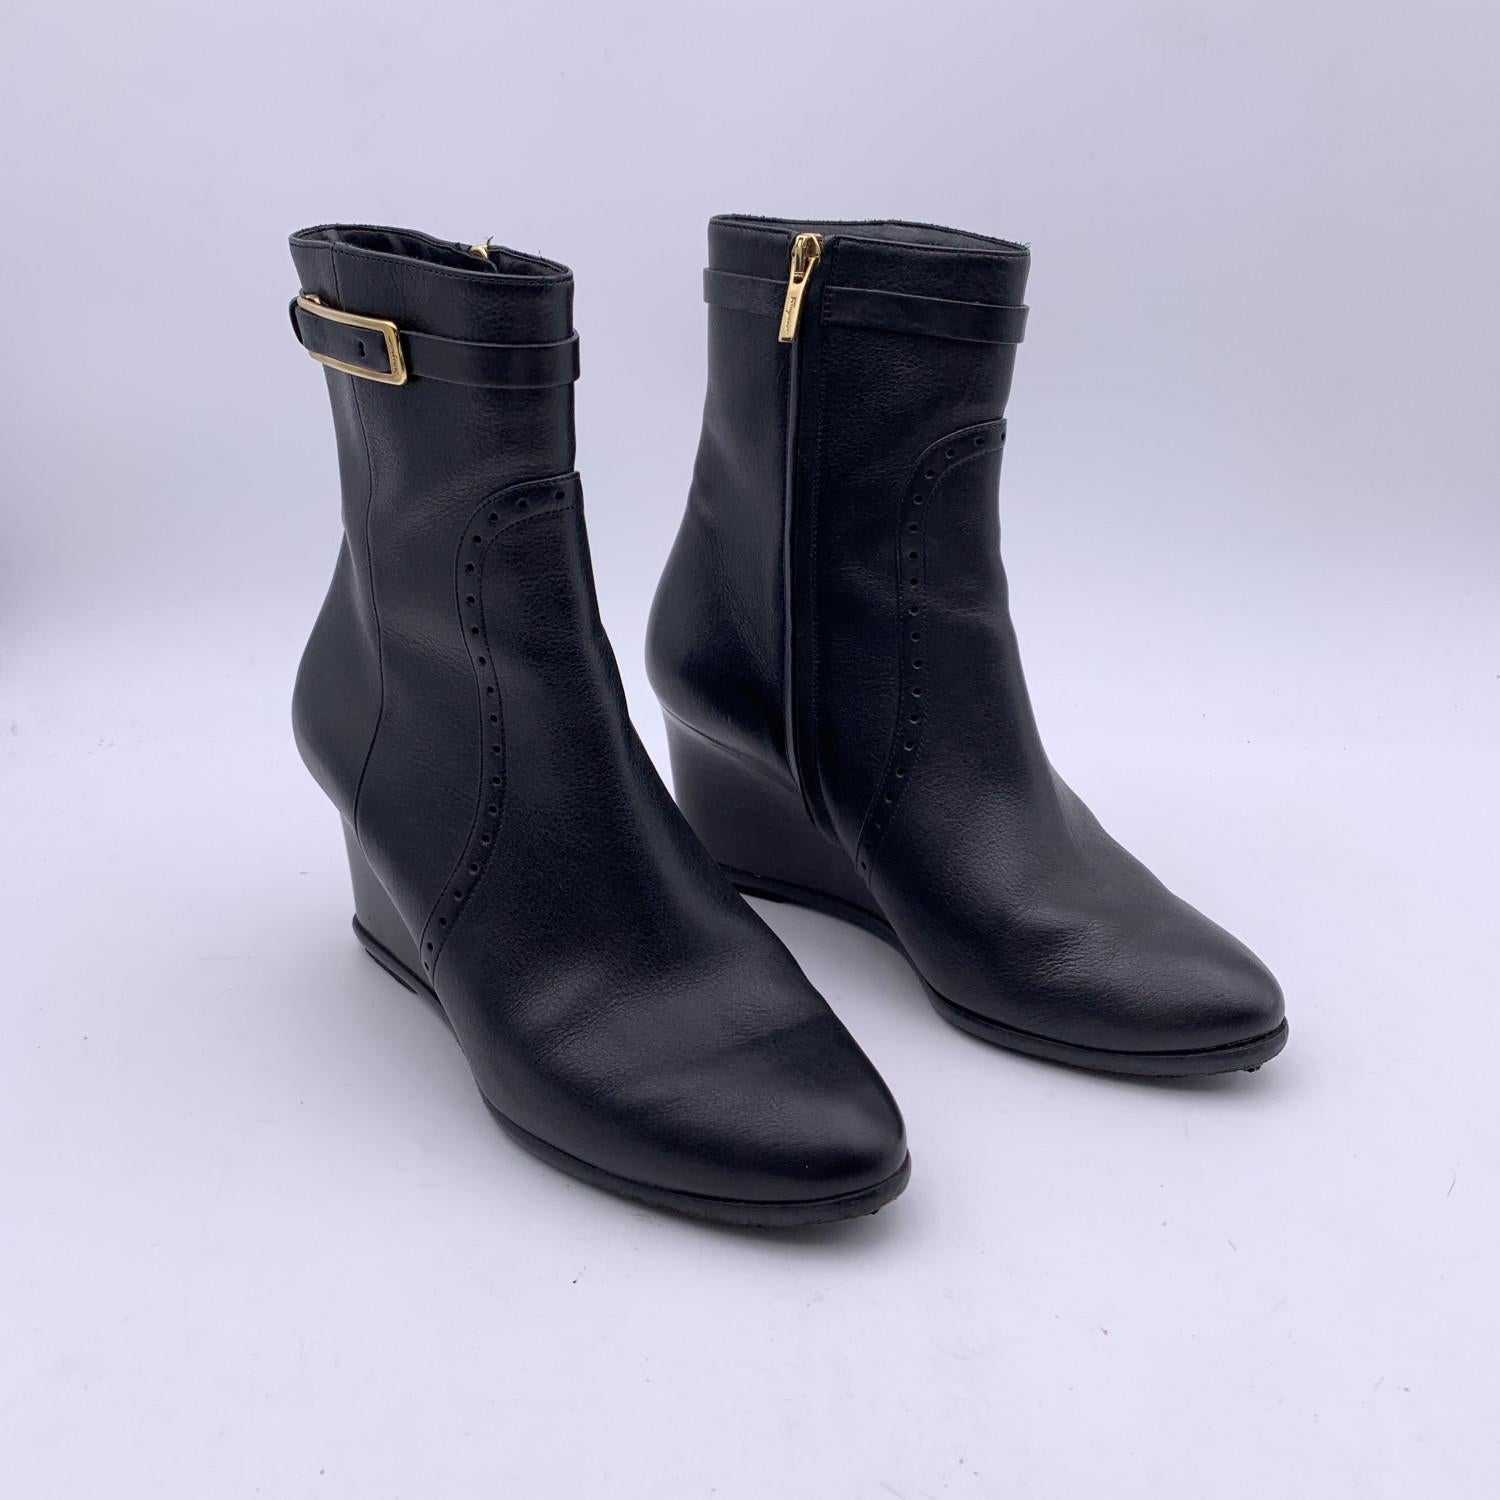 Salvatore Ferragamo black leather heeled ankle boots with wedges. Composition: Leather. Zip closure on the side. Almond toeline. Gold metal buckle detail. Leather outsole. Heels height: 3 inches - 7.6 cm . Size 6.5 C - 37 C

Details

MATERIAL: